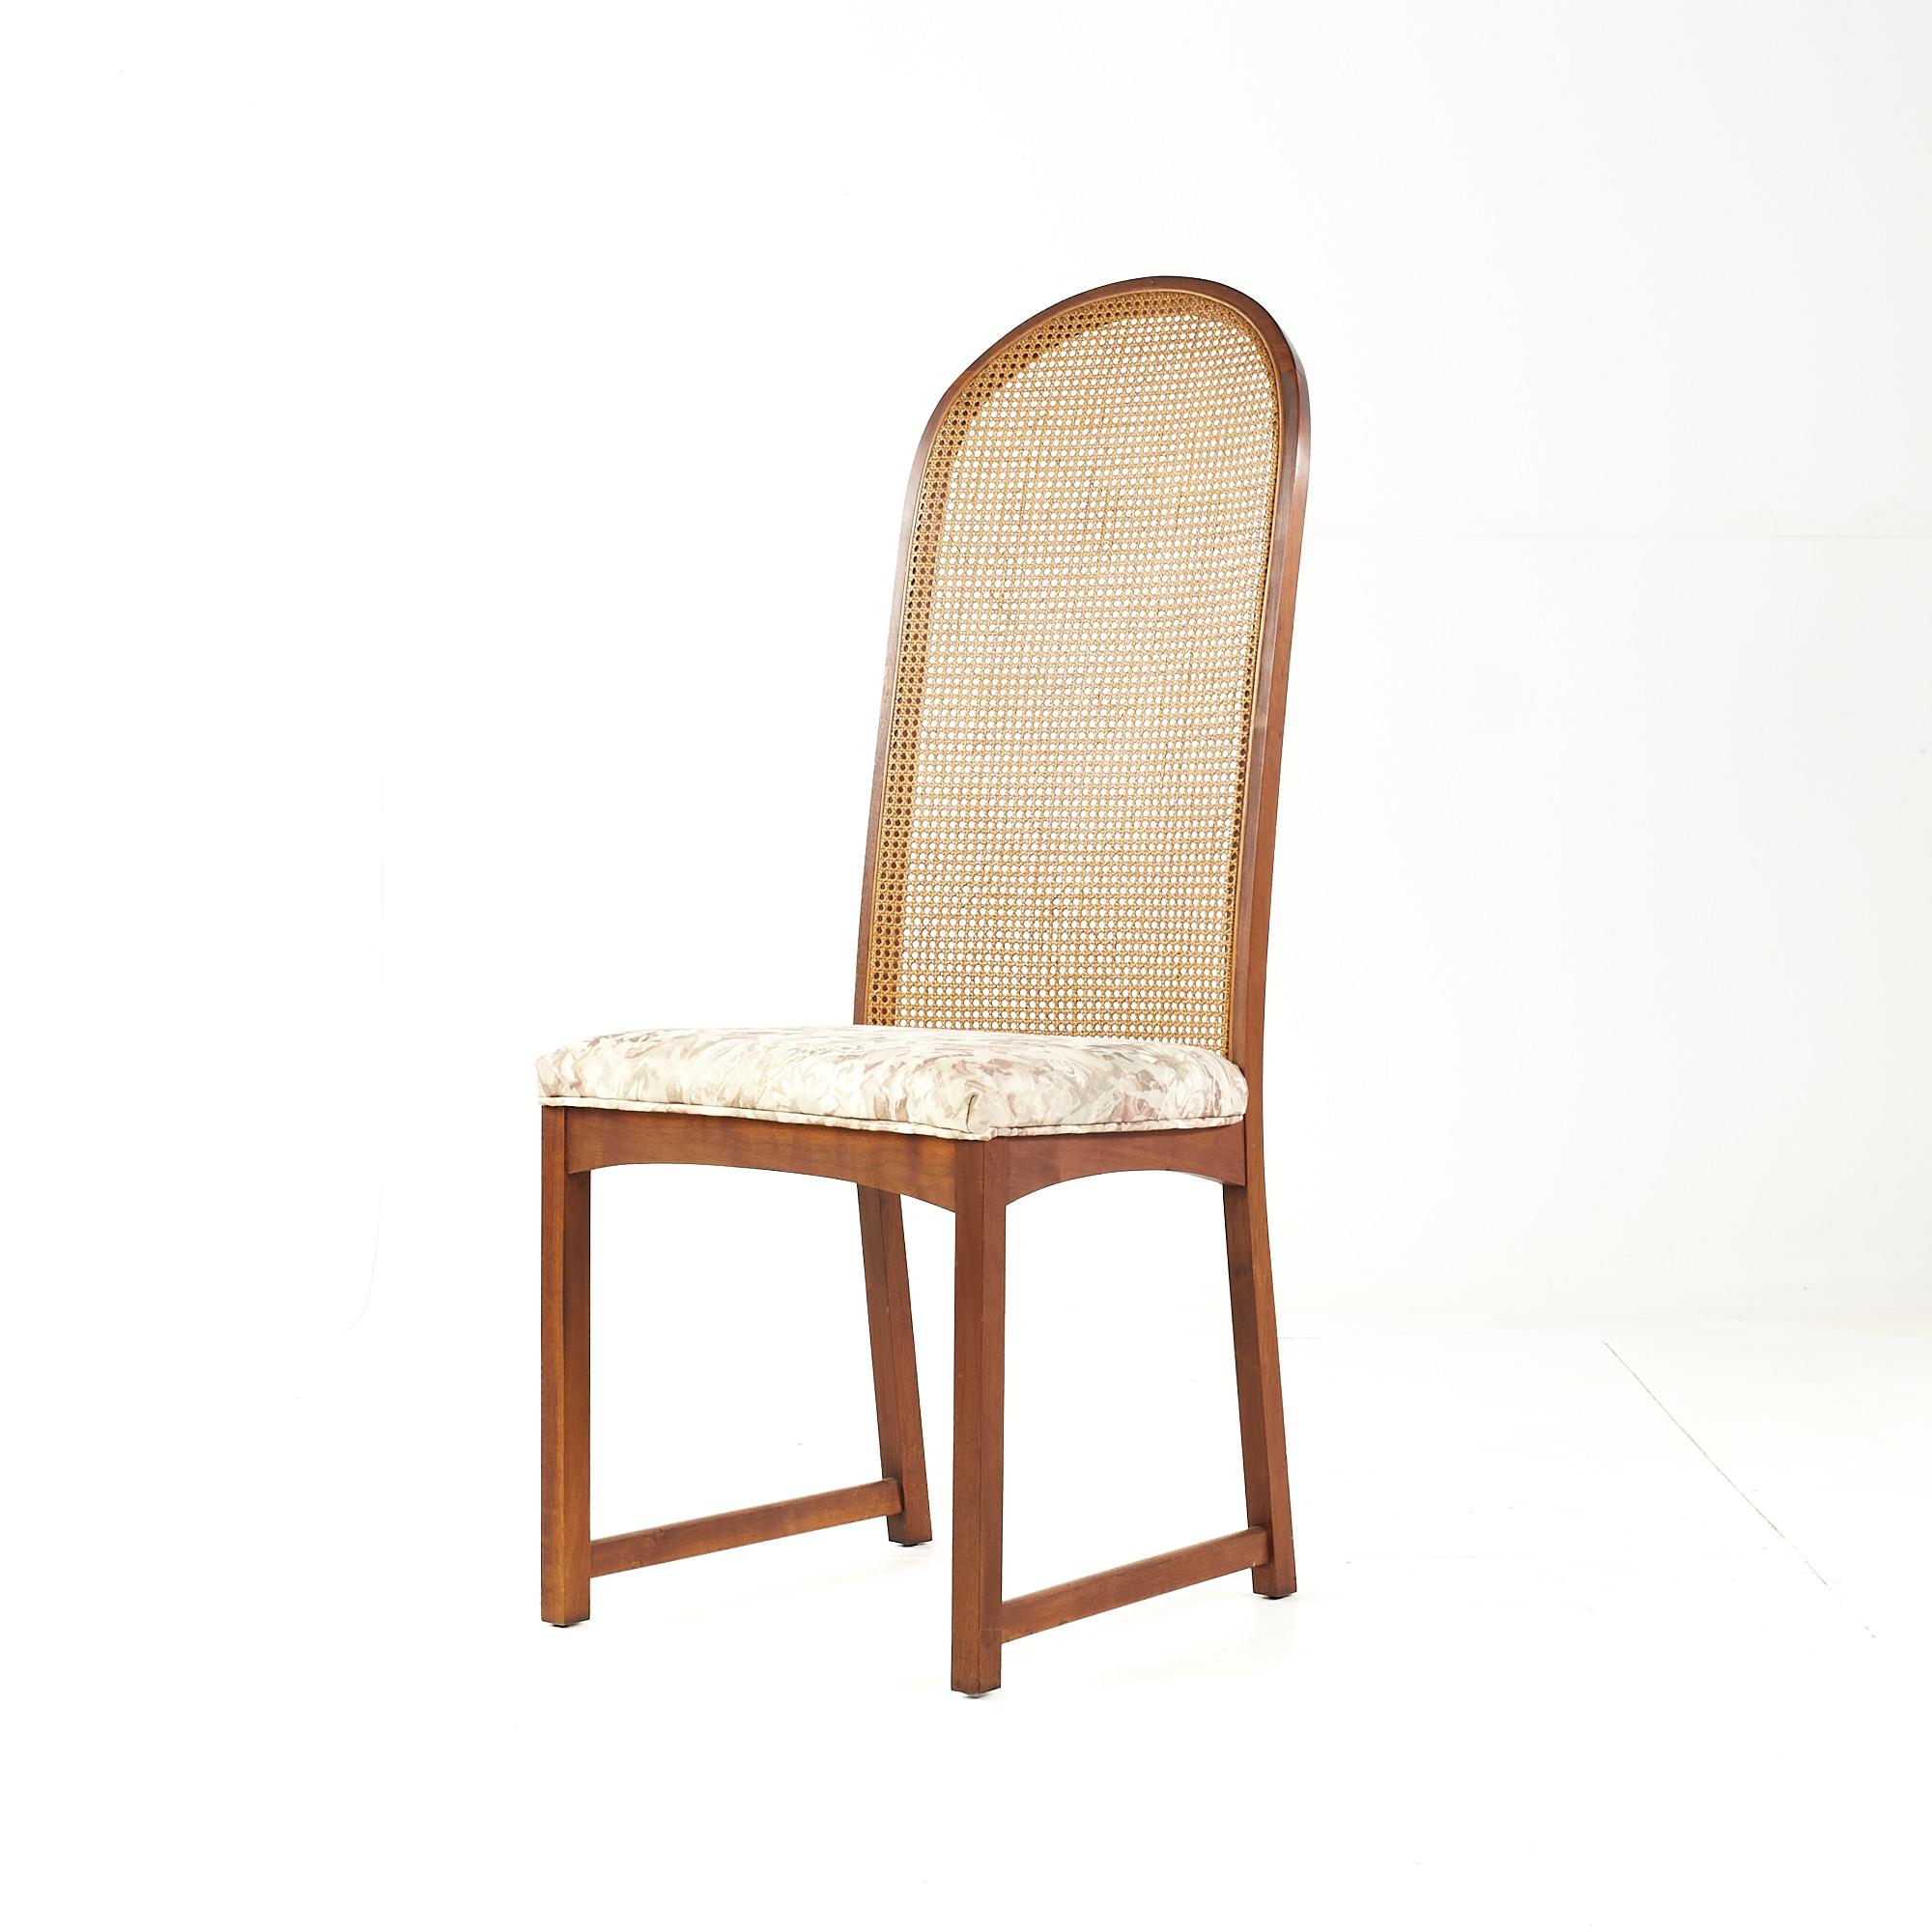 Late 20th Century Milo Baughman for Directional MCM Walnut and Cane Back Dining Chairs - Set of 6 For Sale